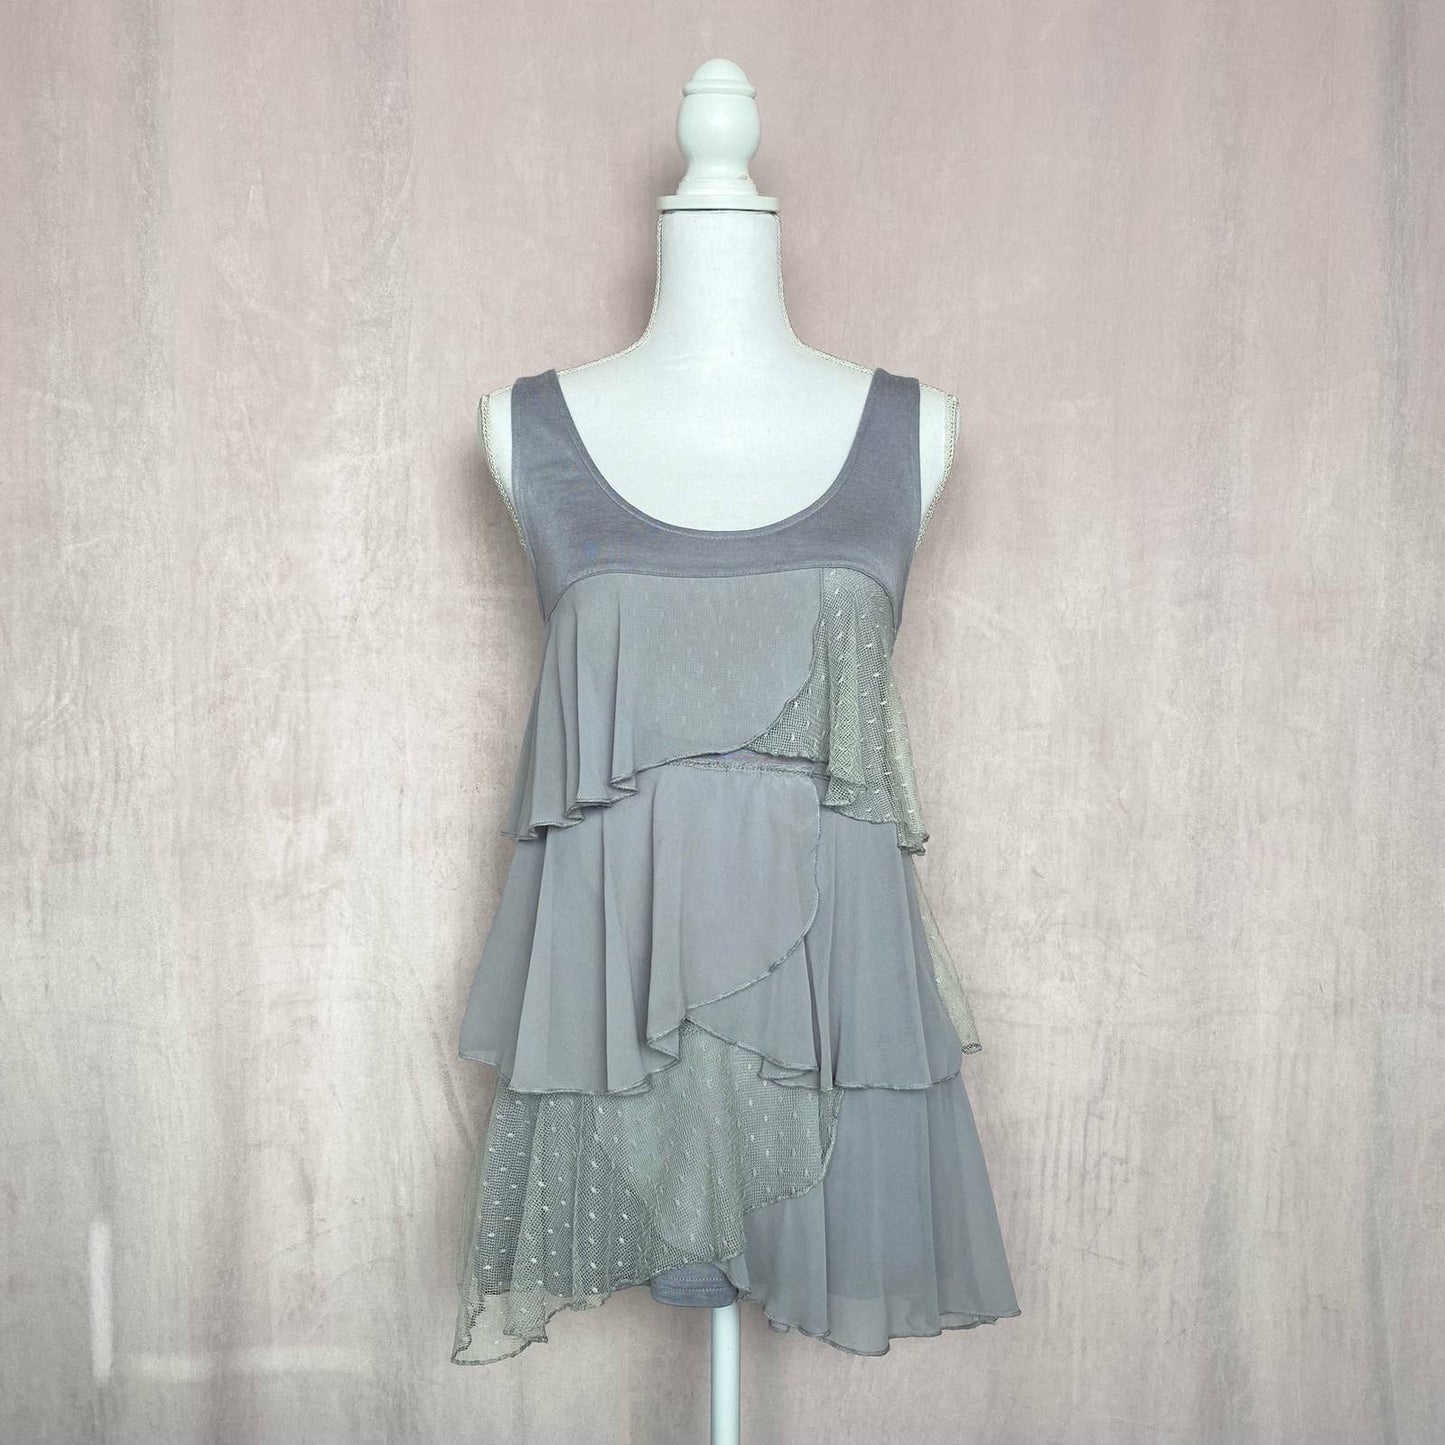 Secondhand Cecico Tiered Ruffle Tank Top Mini Dress, Size Small